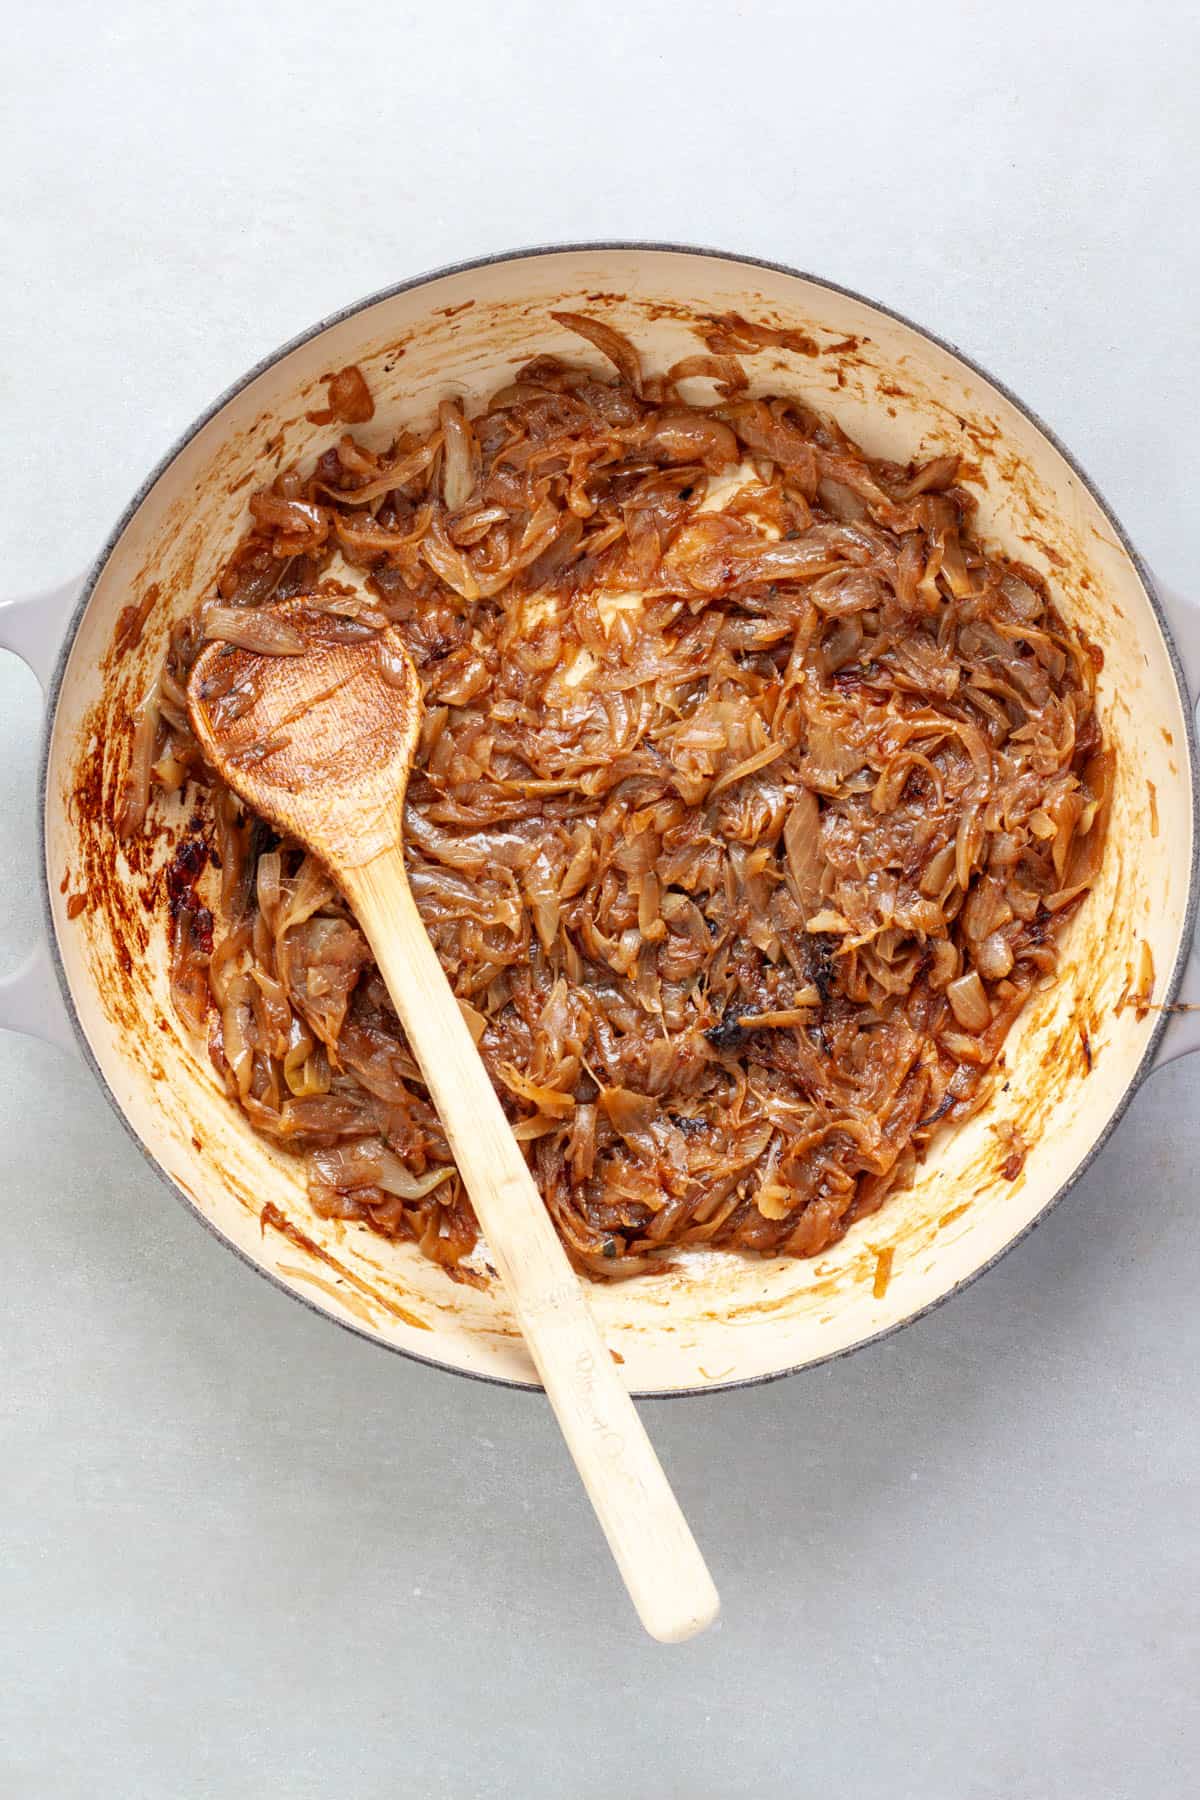 Caramelized onions freshly cooked in a large pan with a wooden spoon stirring them.